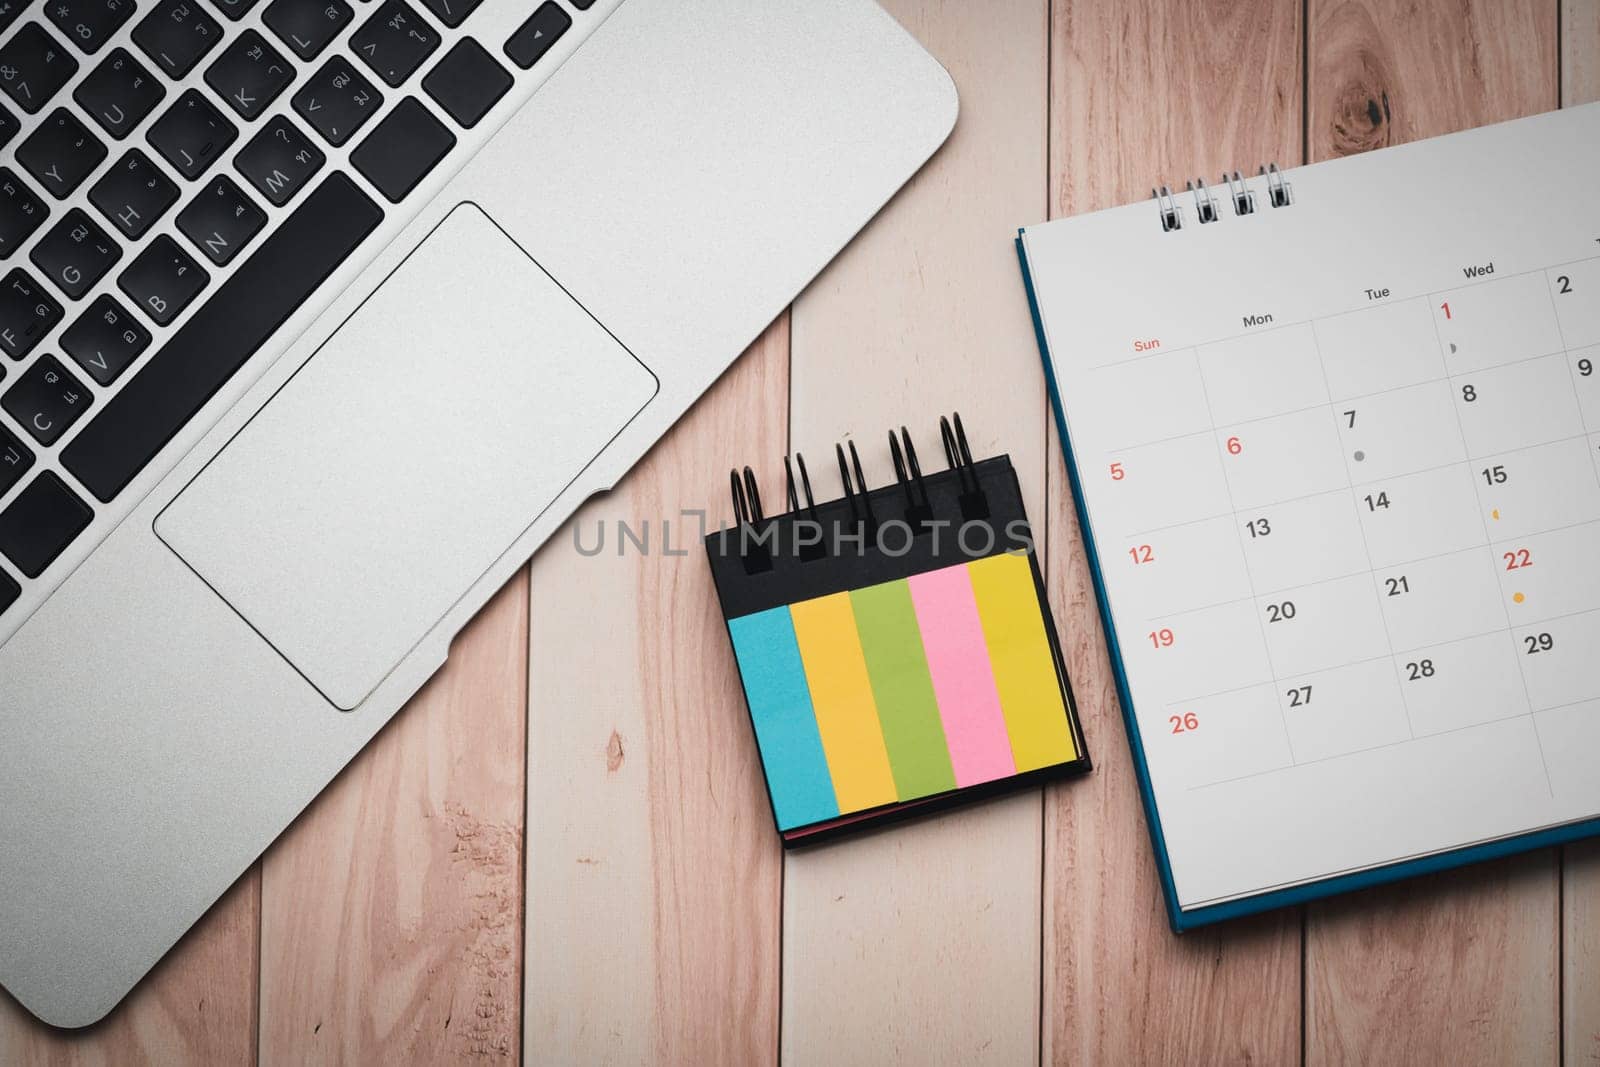 Workspace Organization with Laptop, Index Flags, Calendar on Wooden Desk by iamnoonmai